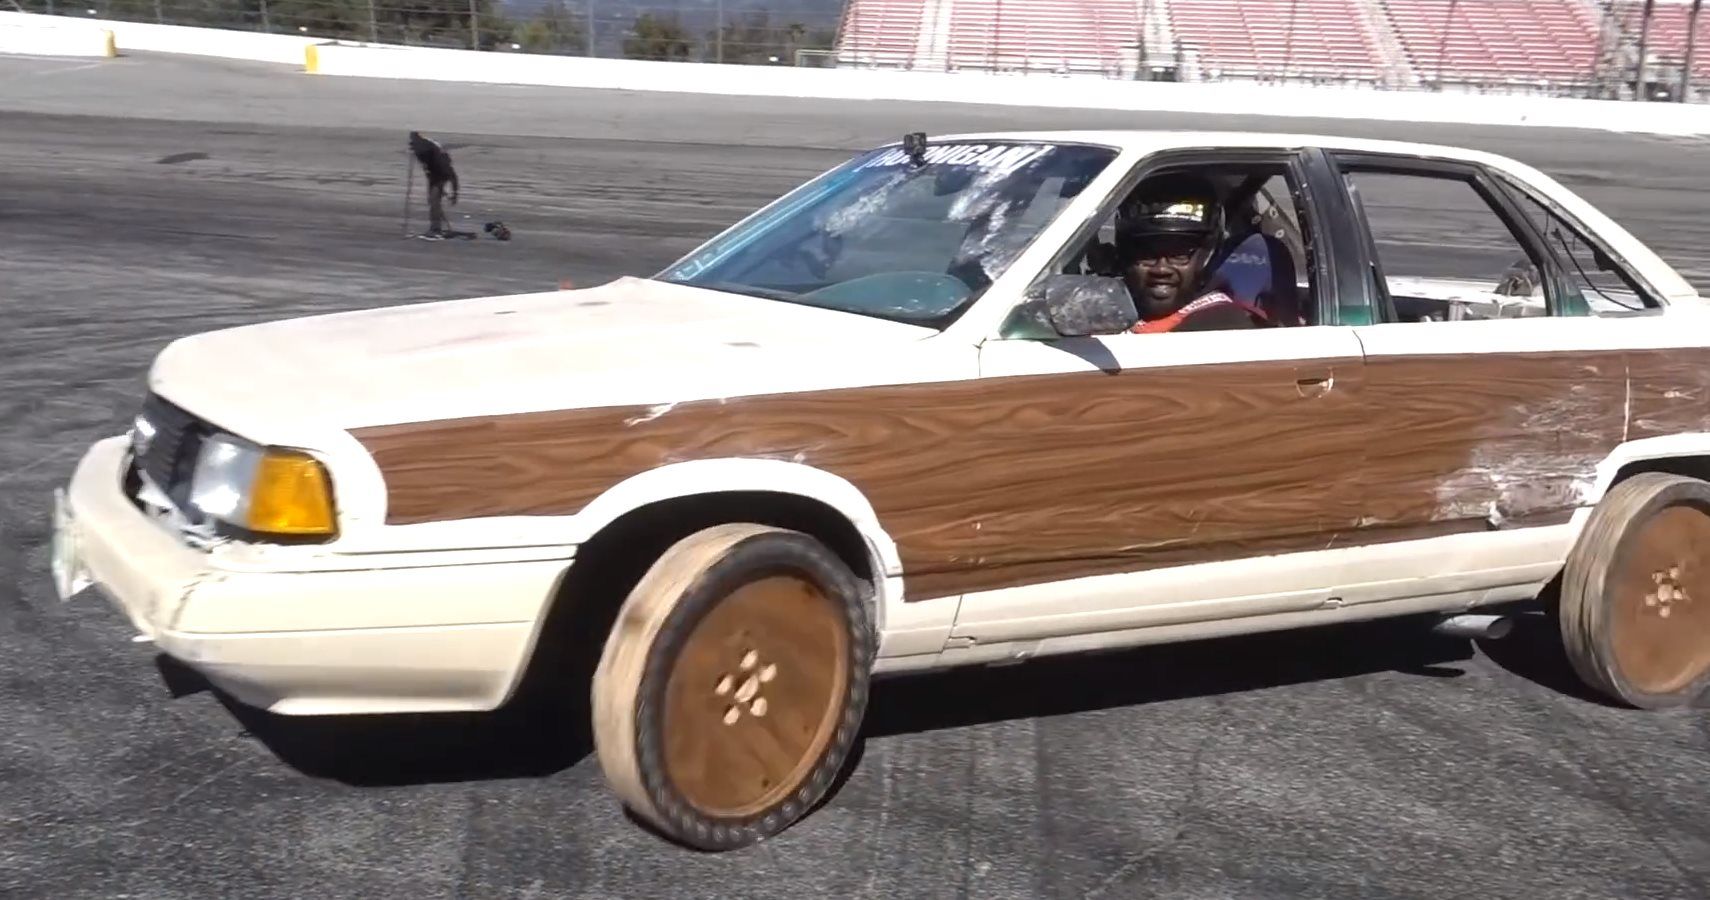 Hoonigans Make Wheels Out Of Wood, With Predictable Results